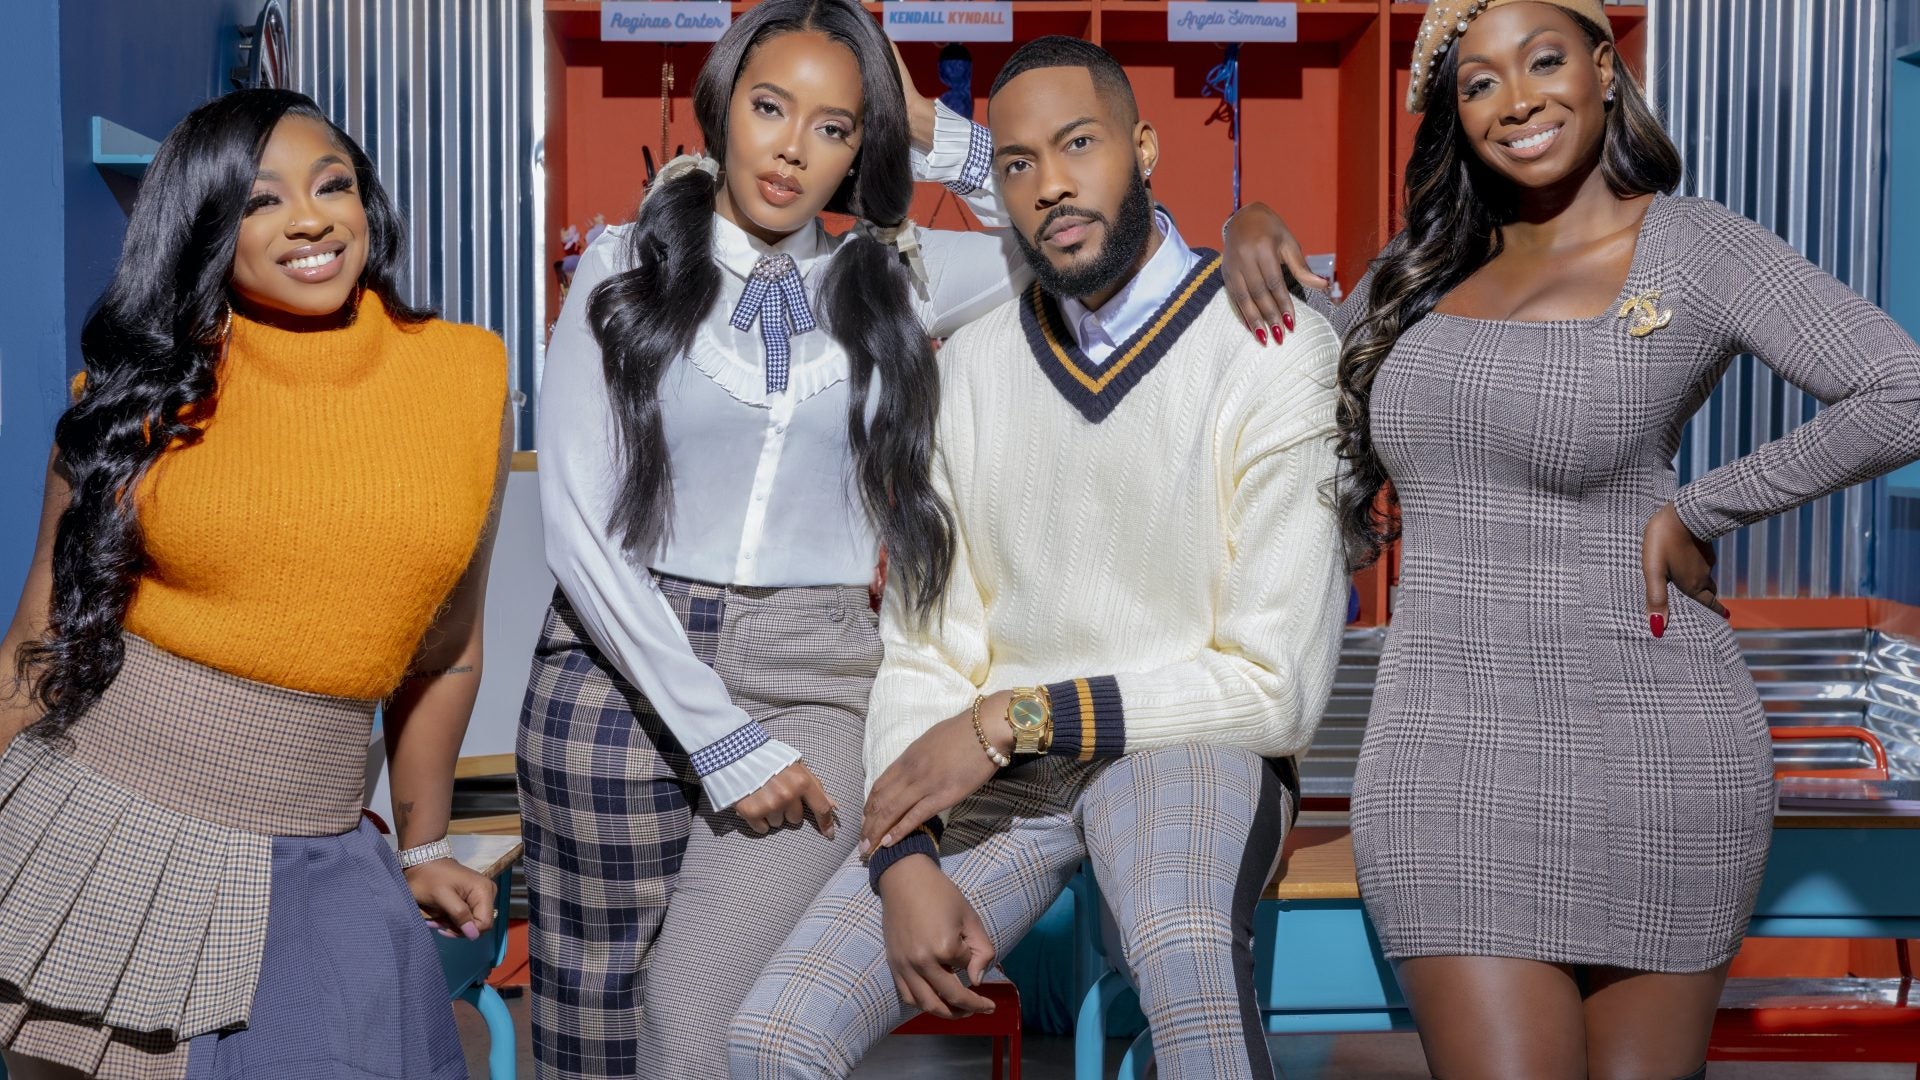 EXCLUSIVE: Angela Simmons And Reginae Carter Join Season 2 Of 'Social Society'